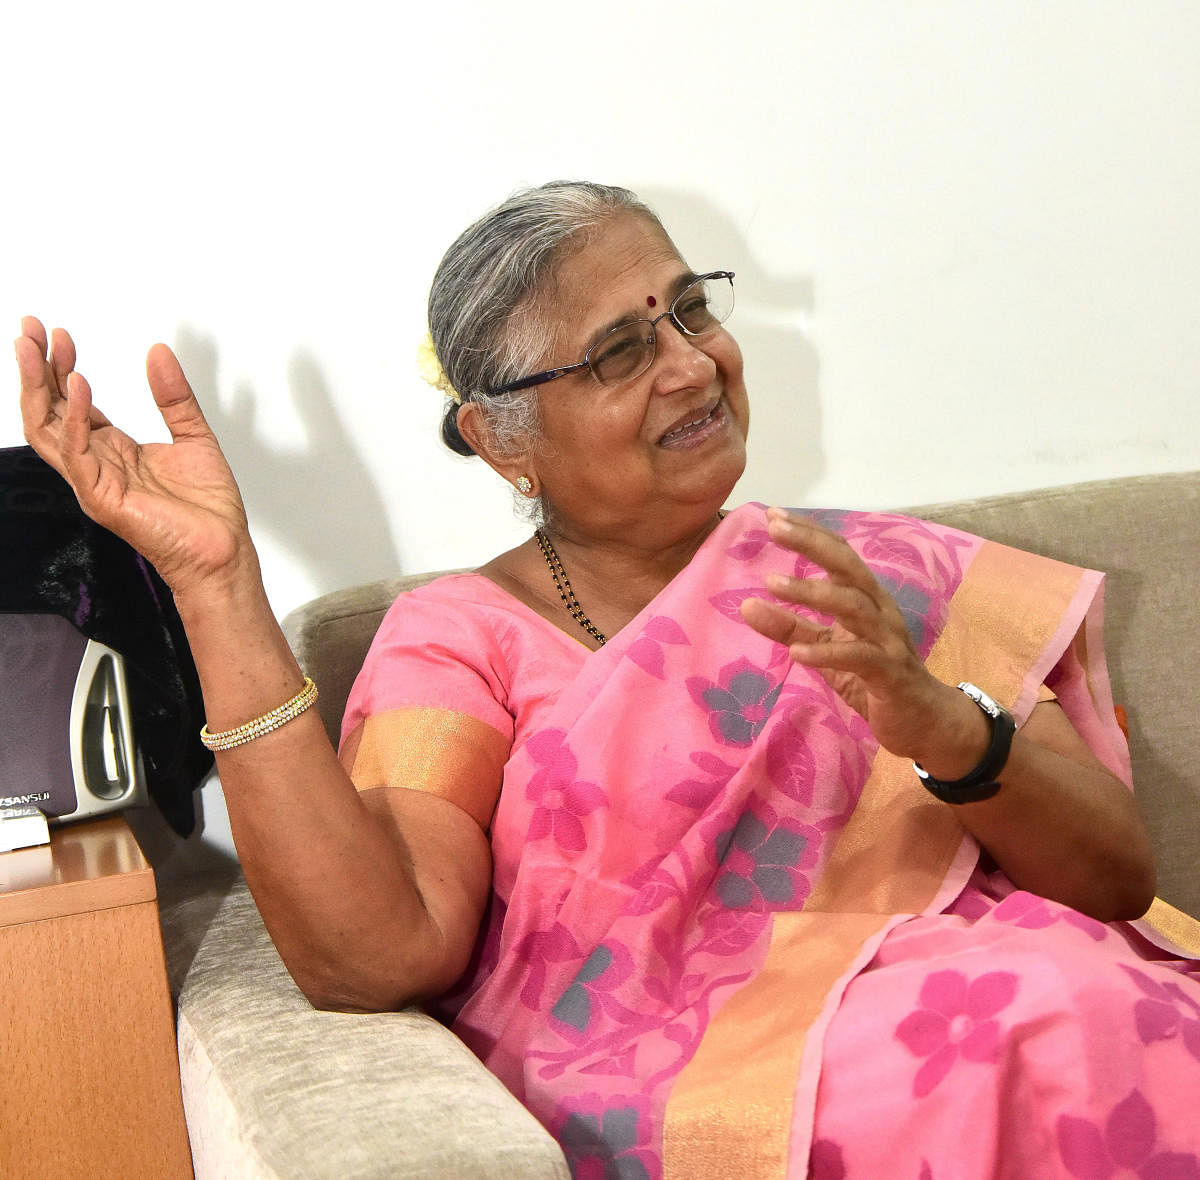 Filmmaker couple Ashwiny Iyer Tiwari and Nitesh Tiwari have joined for a film based on the lives of Infosys co-founder NR Narayana Murthy and his wife Sudha Murthy (above). Credit: DH Photo